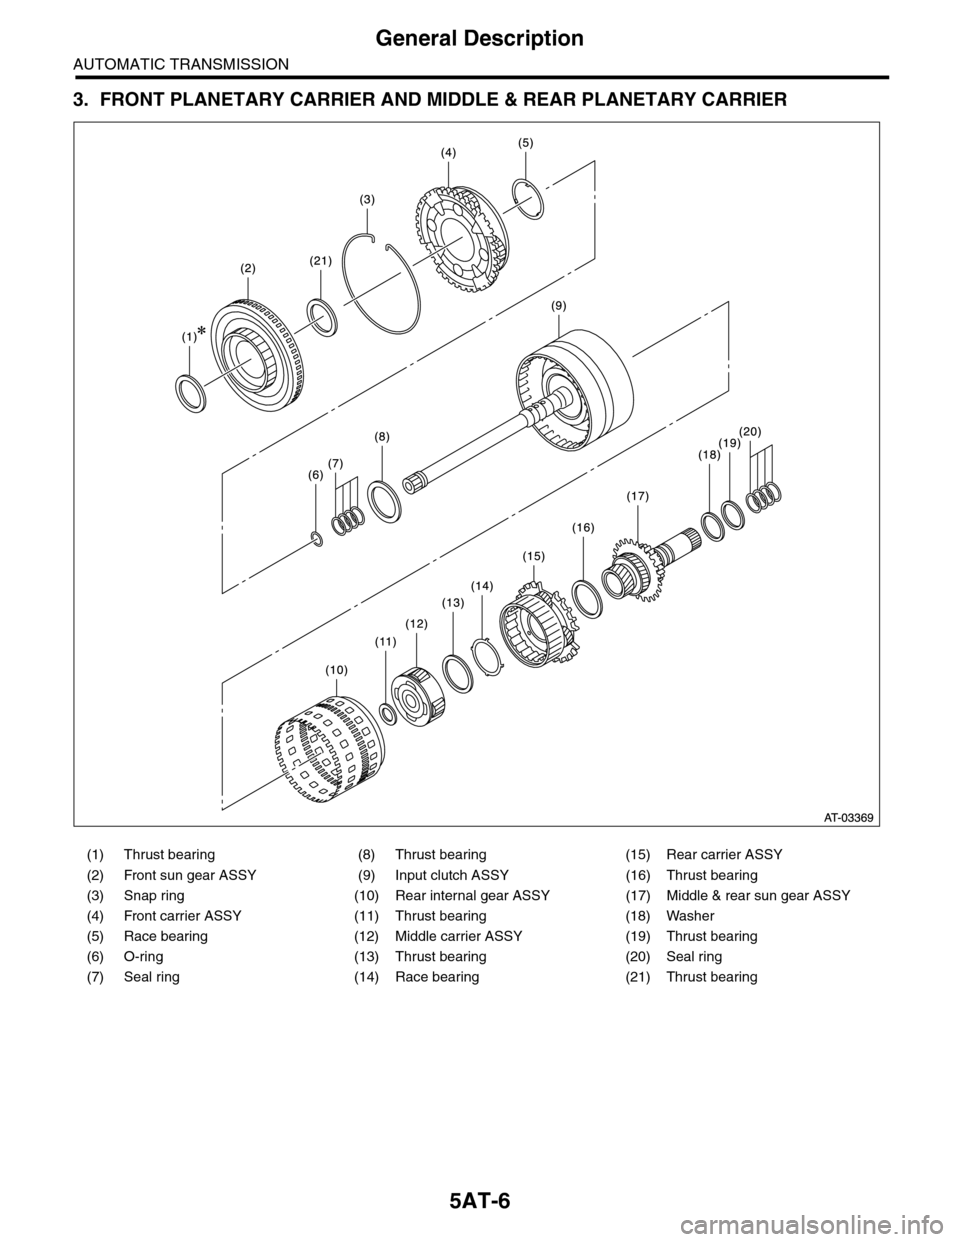 SUBARU TRIBECA 2009 1.G Service Workshop Manual 5AT-6
General Description
AUTOMATIC TRANSMISSION
3. FRONT PLANETARY CARRIER AND MIDDLE & REAR PLANETARY CARRIER
(1) Thrust bearing (8) Thrust bearing (15) Rear carrier ASSY
(2) Front sun gear ASSY (9)